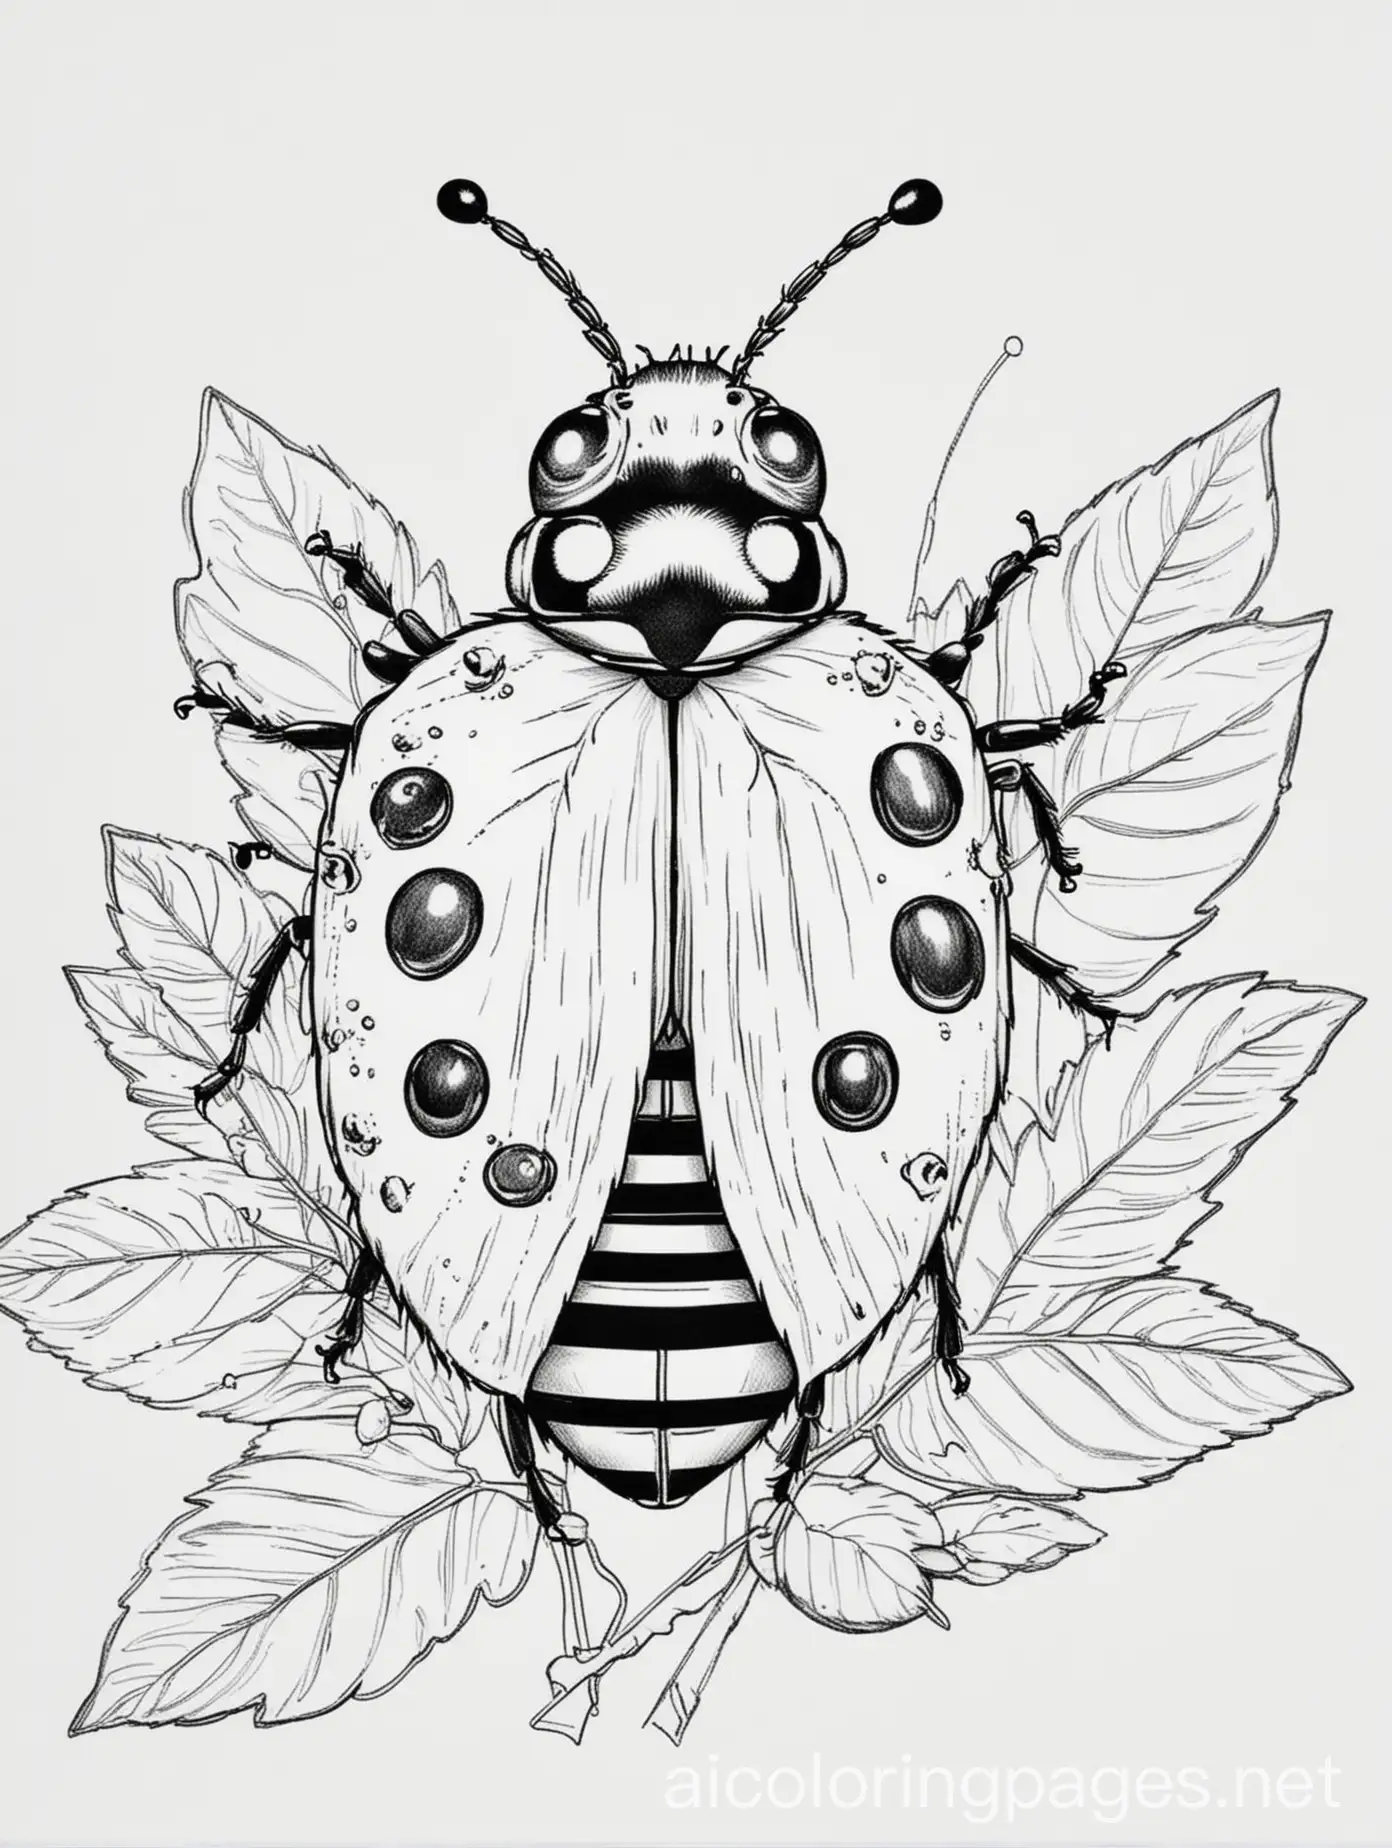 Ladybug, Coloring Page, black and white, line art, white background, Simplicity, Ample White Space. The background of the coloring page is plain white to make it easy for young children to color within the lines. The outlines of all the subjects are easy to distinguish, making it simple for kids to color without too much difficulty